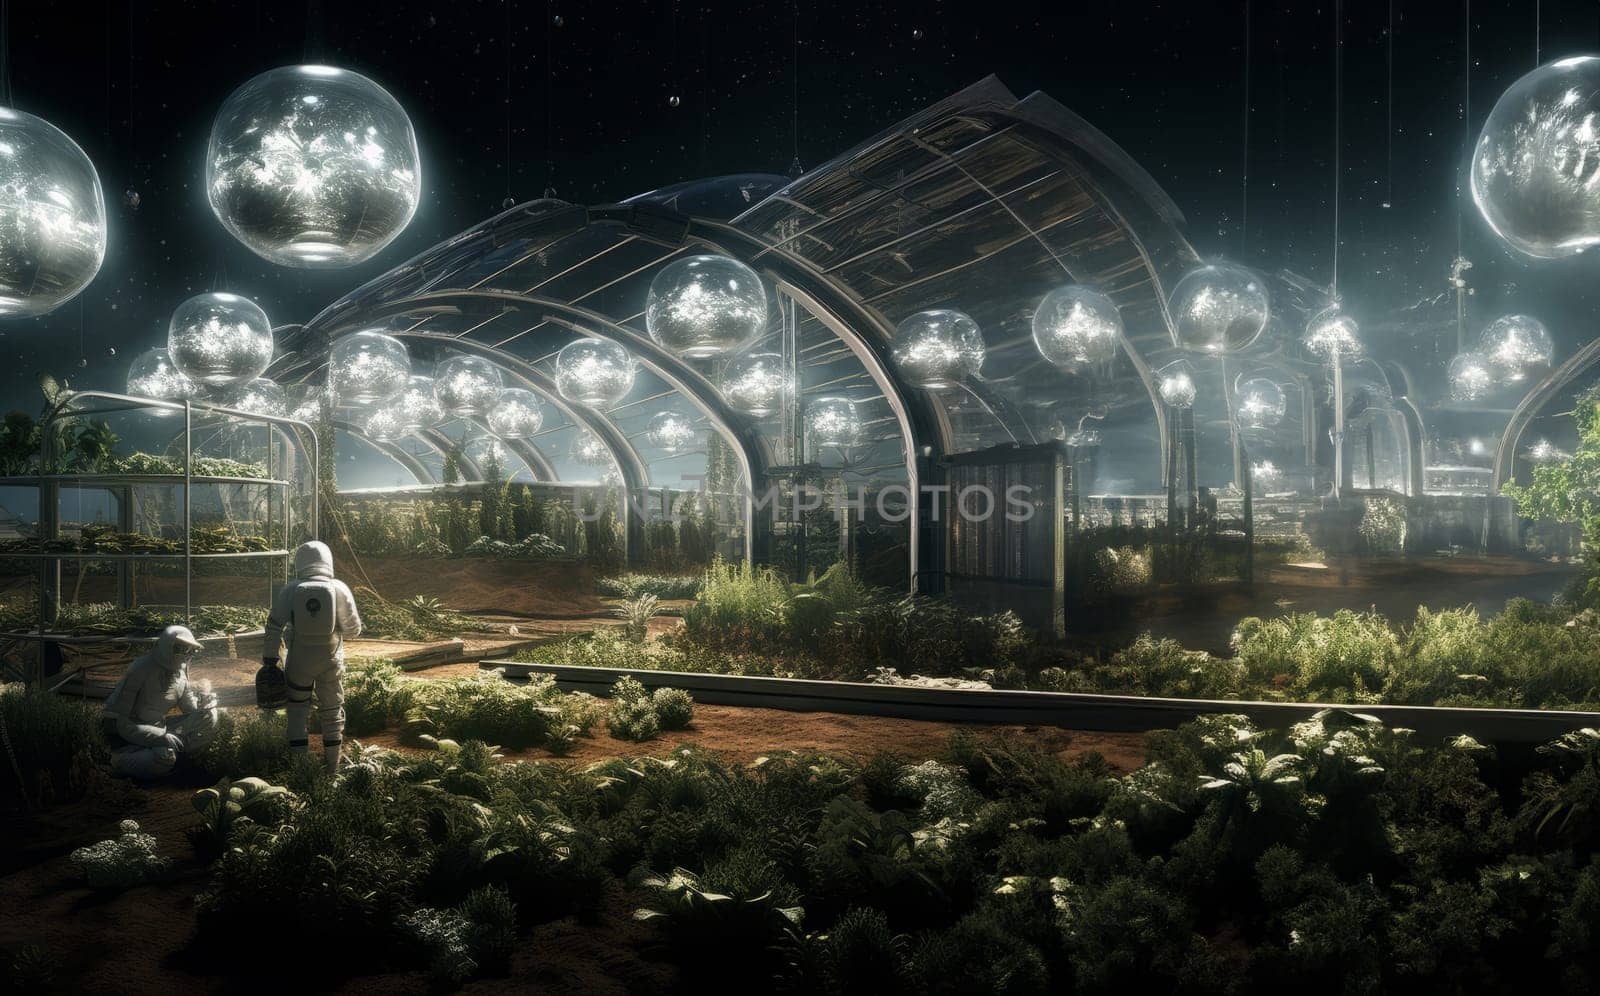 A futuristic depiction of agriculture shows cultivation and farming in glass enclosures on the surface of Mars in space, highlighting innovation and sustainability efforts in space colonization and exploration.Generated image by dotshock